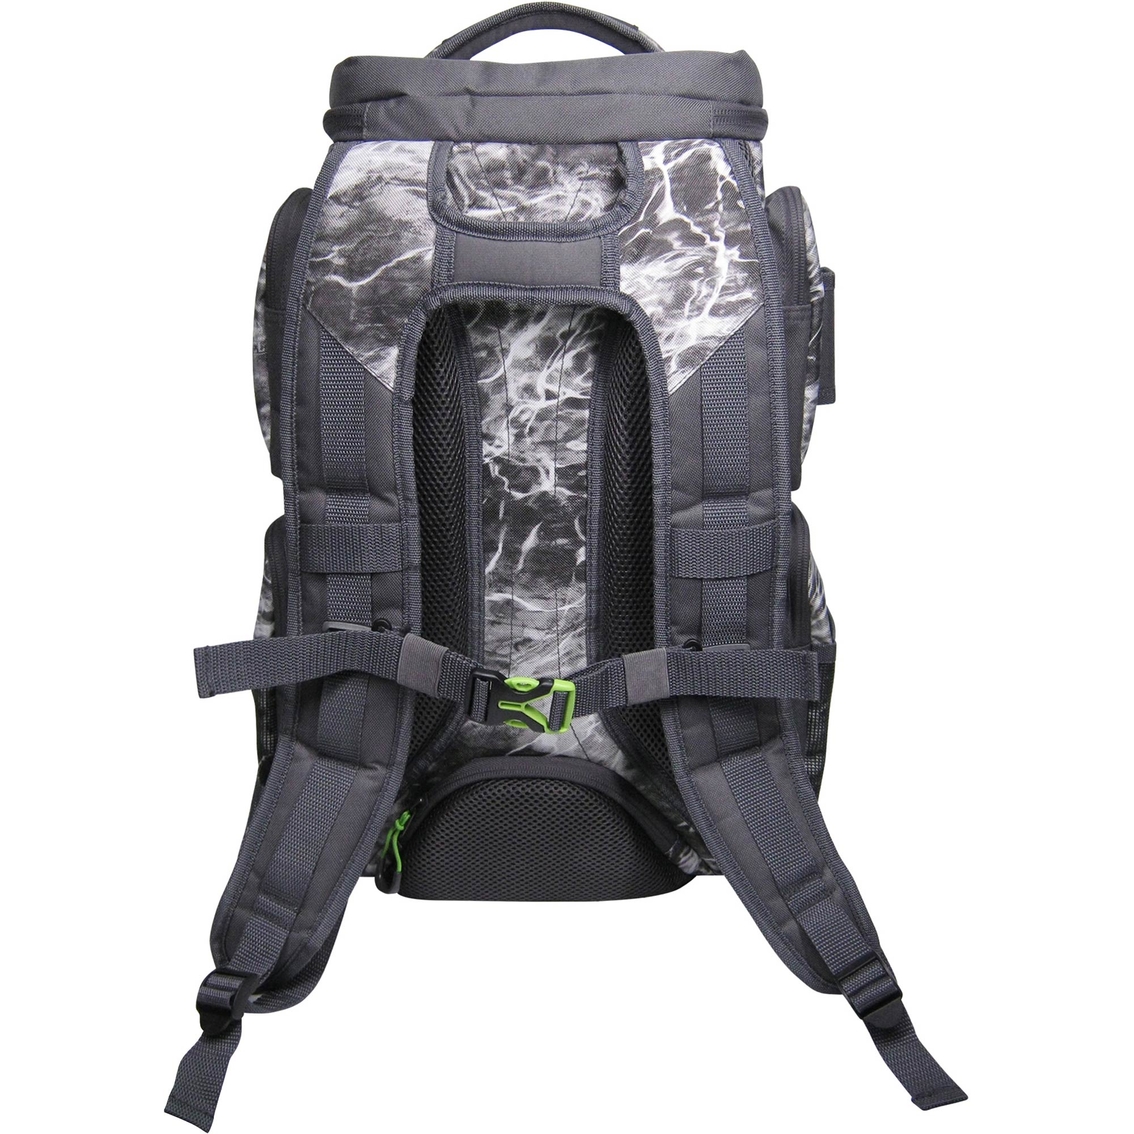 Evolution Outdoors Largemouth 3600 Backpack - Image 2 of 6